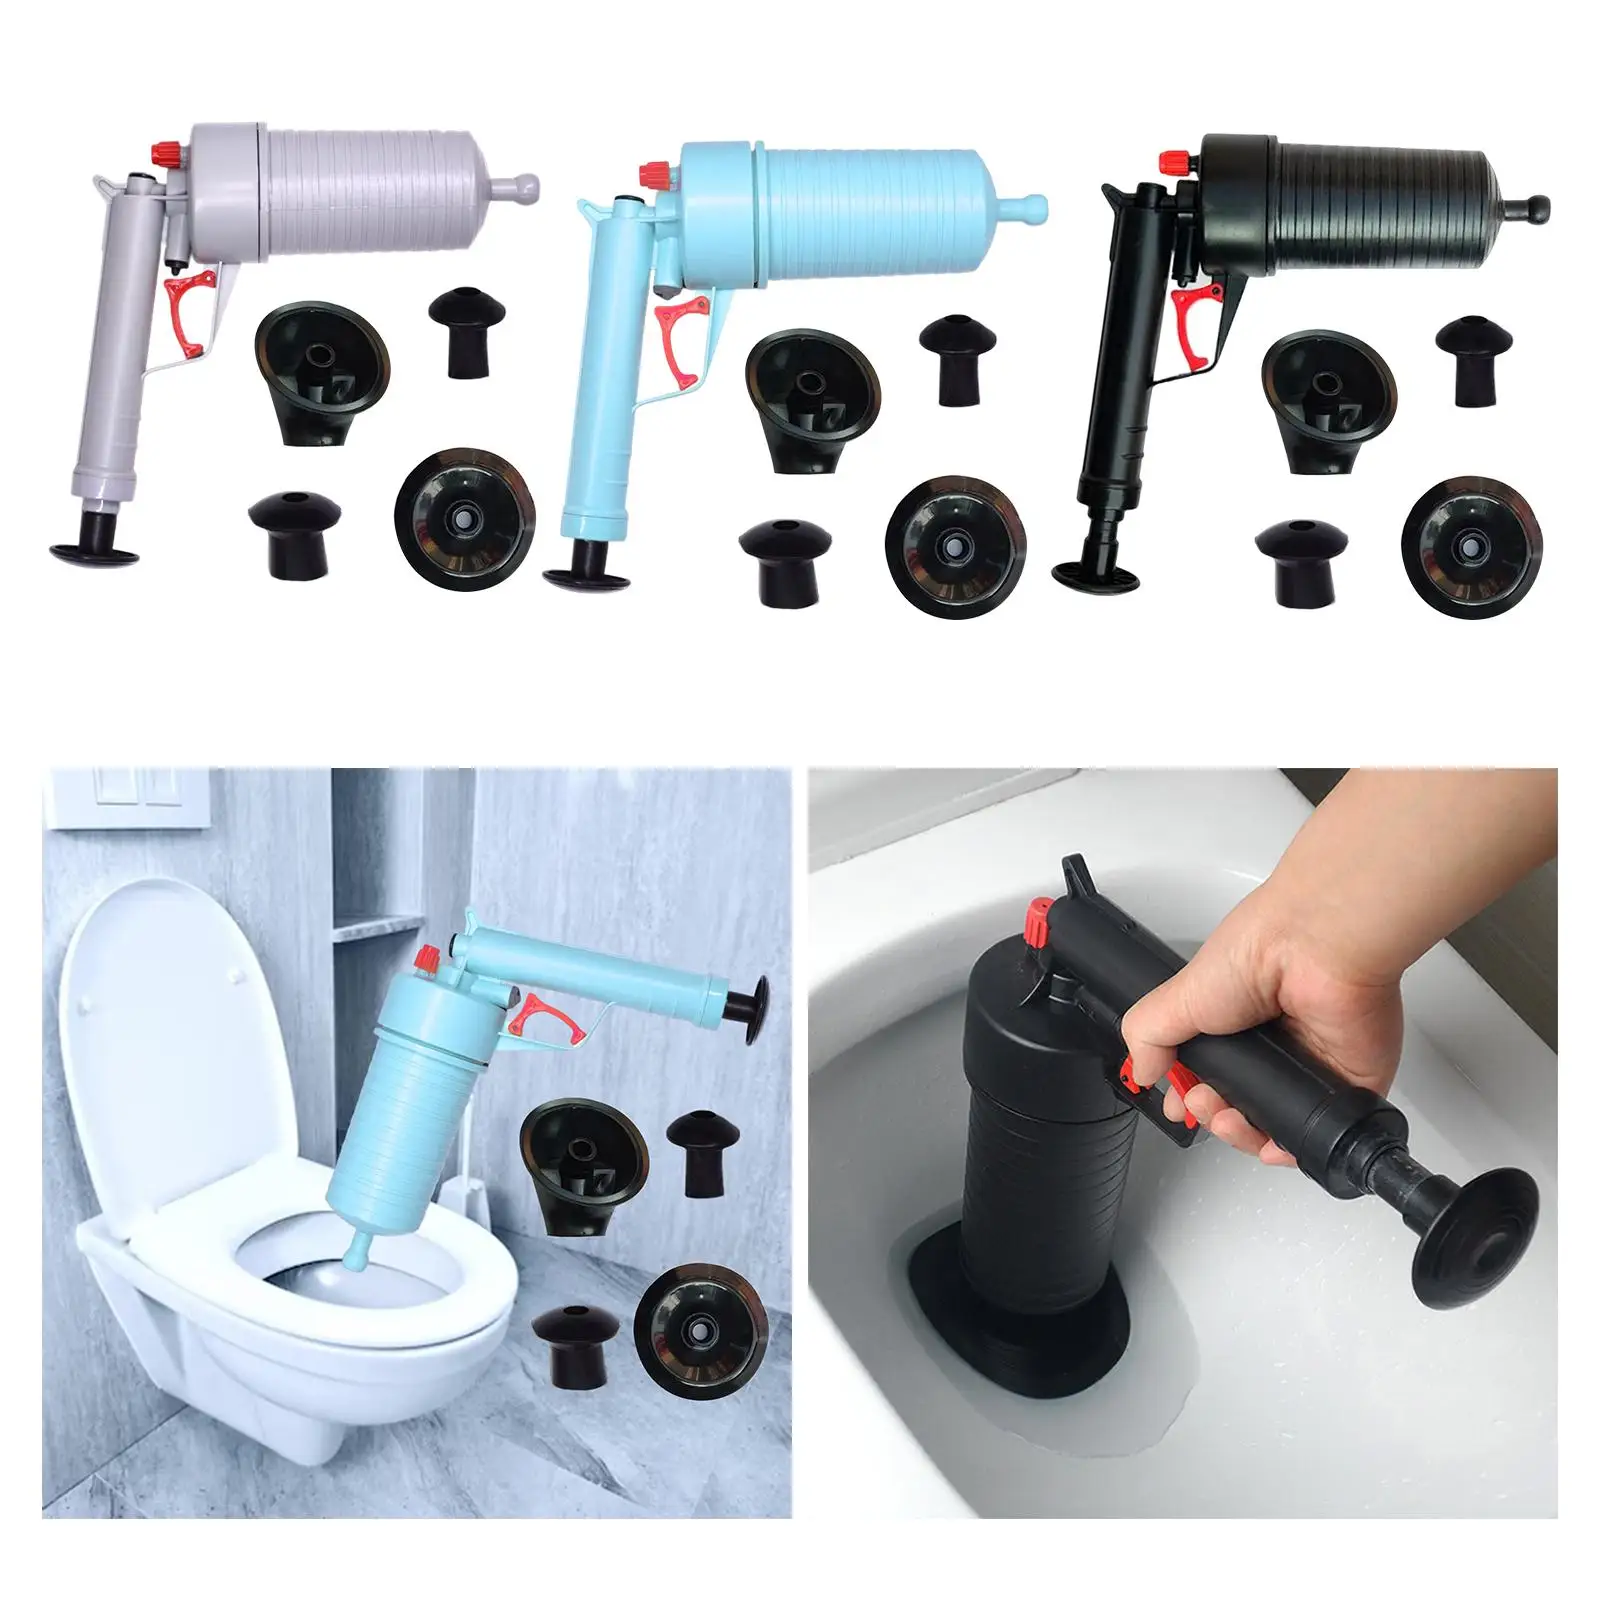 Universal Sink Plunger Pipe Dredge Tools Air Pressure Drain Pump for Bathroom, Kitchen Efficient Cleaning Durable Practical